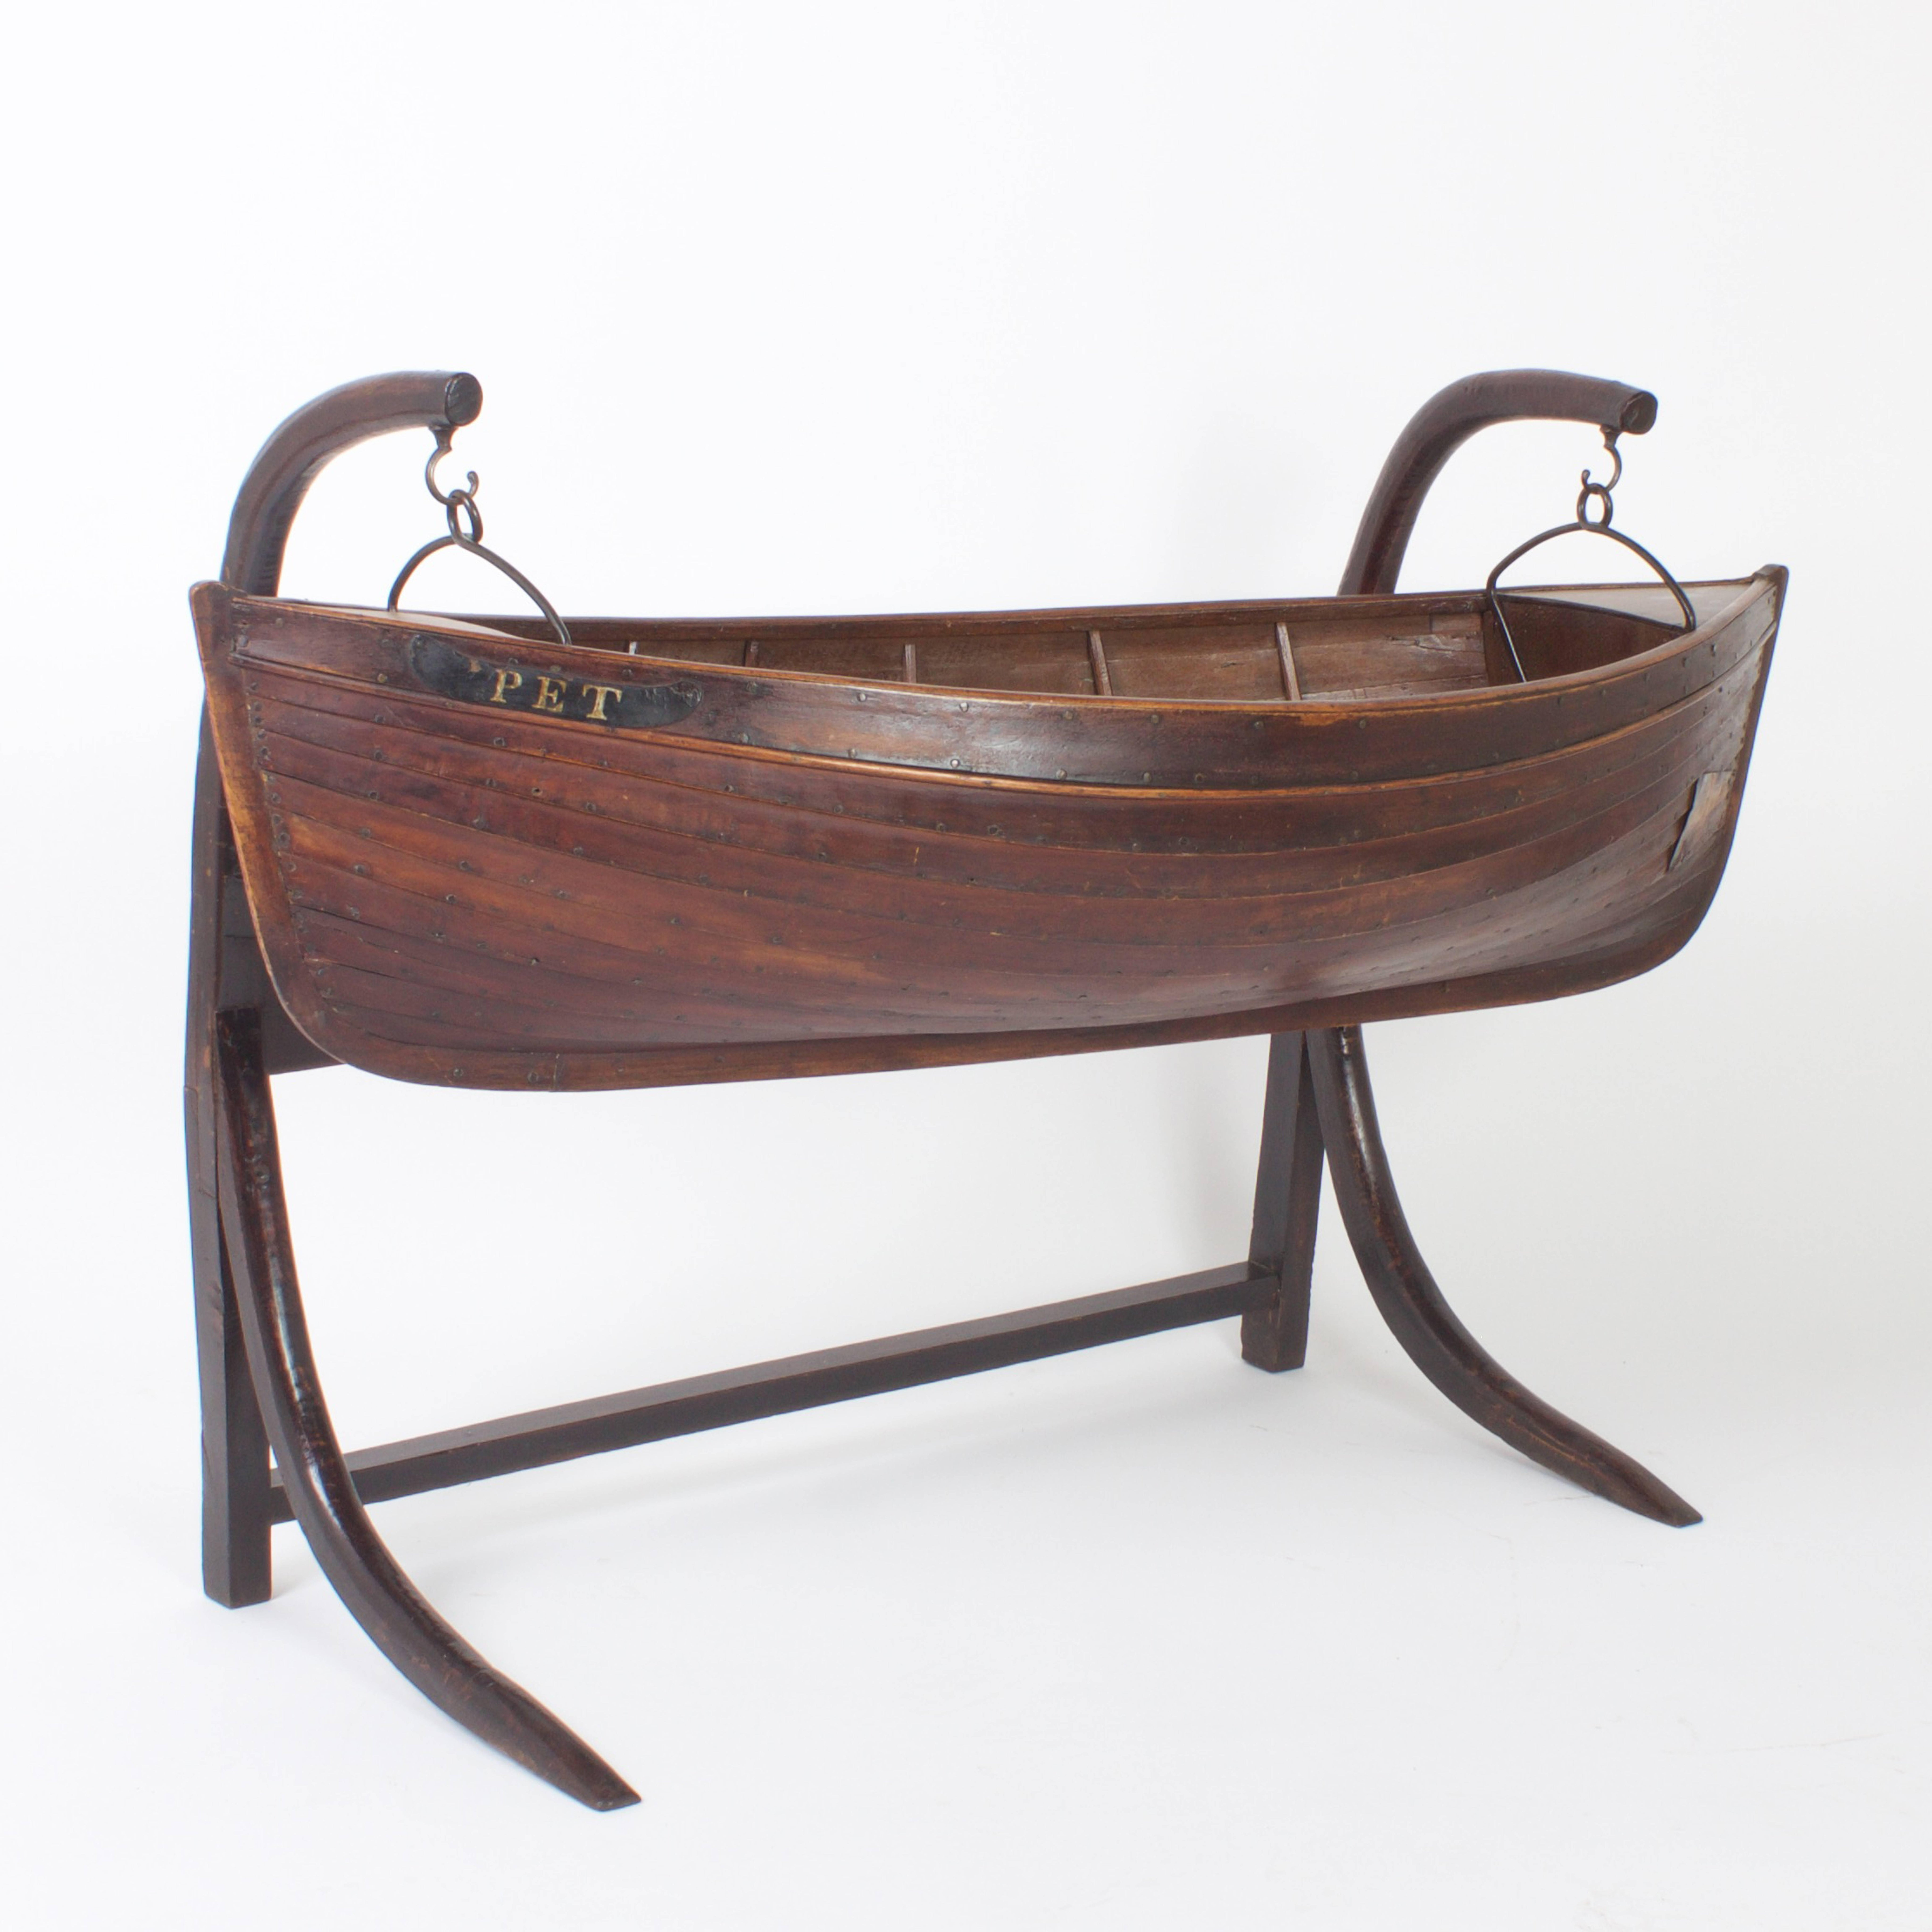 Here is a rare find indeed, an antique boat model baby bassinet or cradle with professional ship lap construction, in a soft wood swinging from its original handmade stand. Having an overall gracious form and perfect time worn patina, decorated with